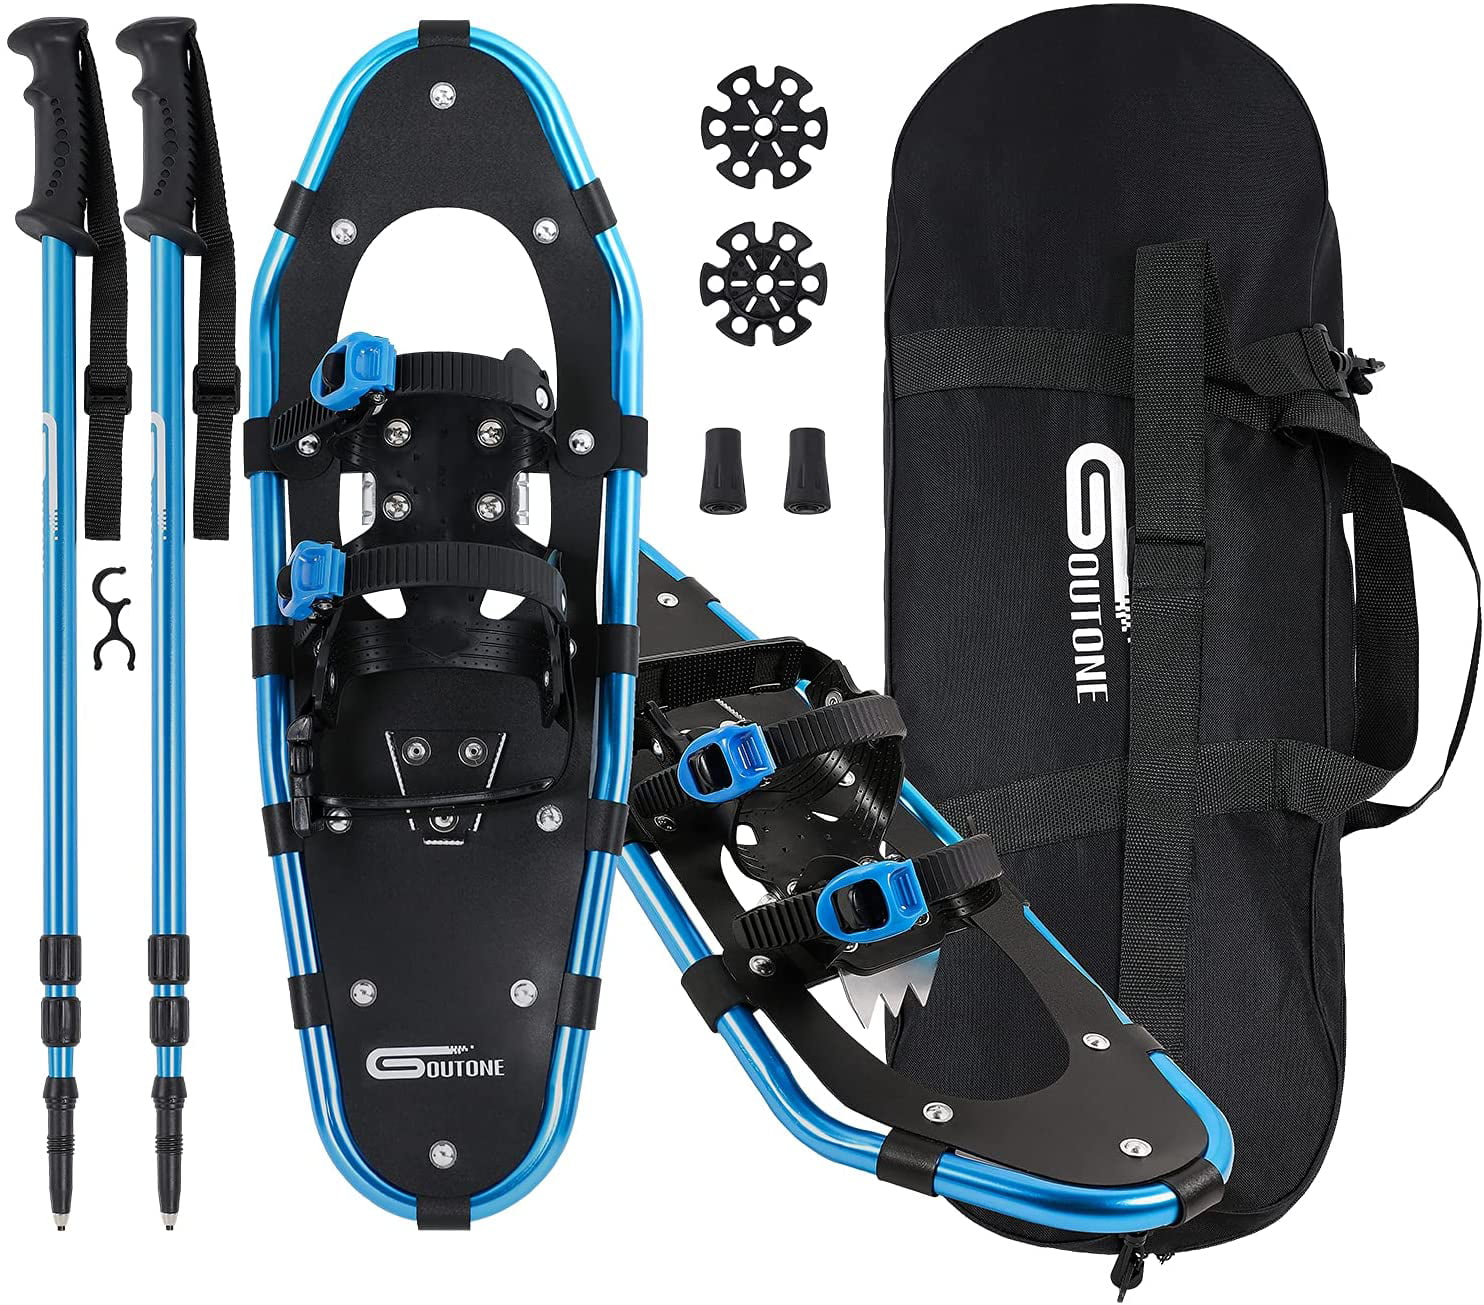 FLASHTEK Lightweight Snowshoes for Men Women Youth Aluminum Terrain Snow Shoes for Hiking and Heel Lift Riser for Mountaineering with Trekking Poles and Carrying Tote Bag 